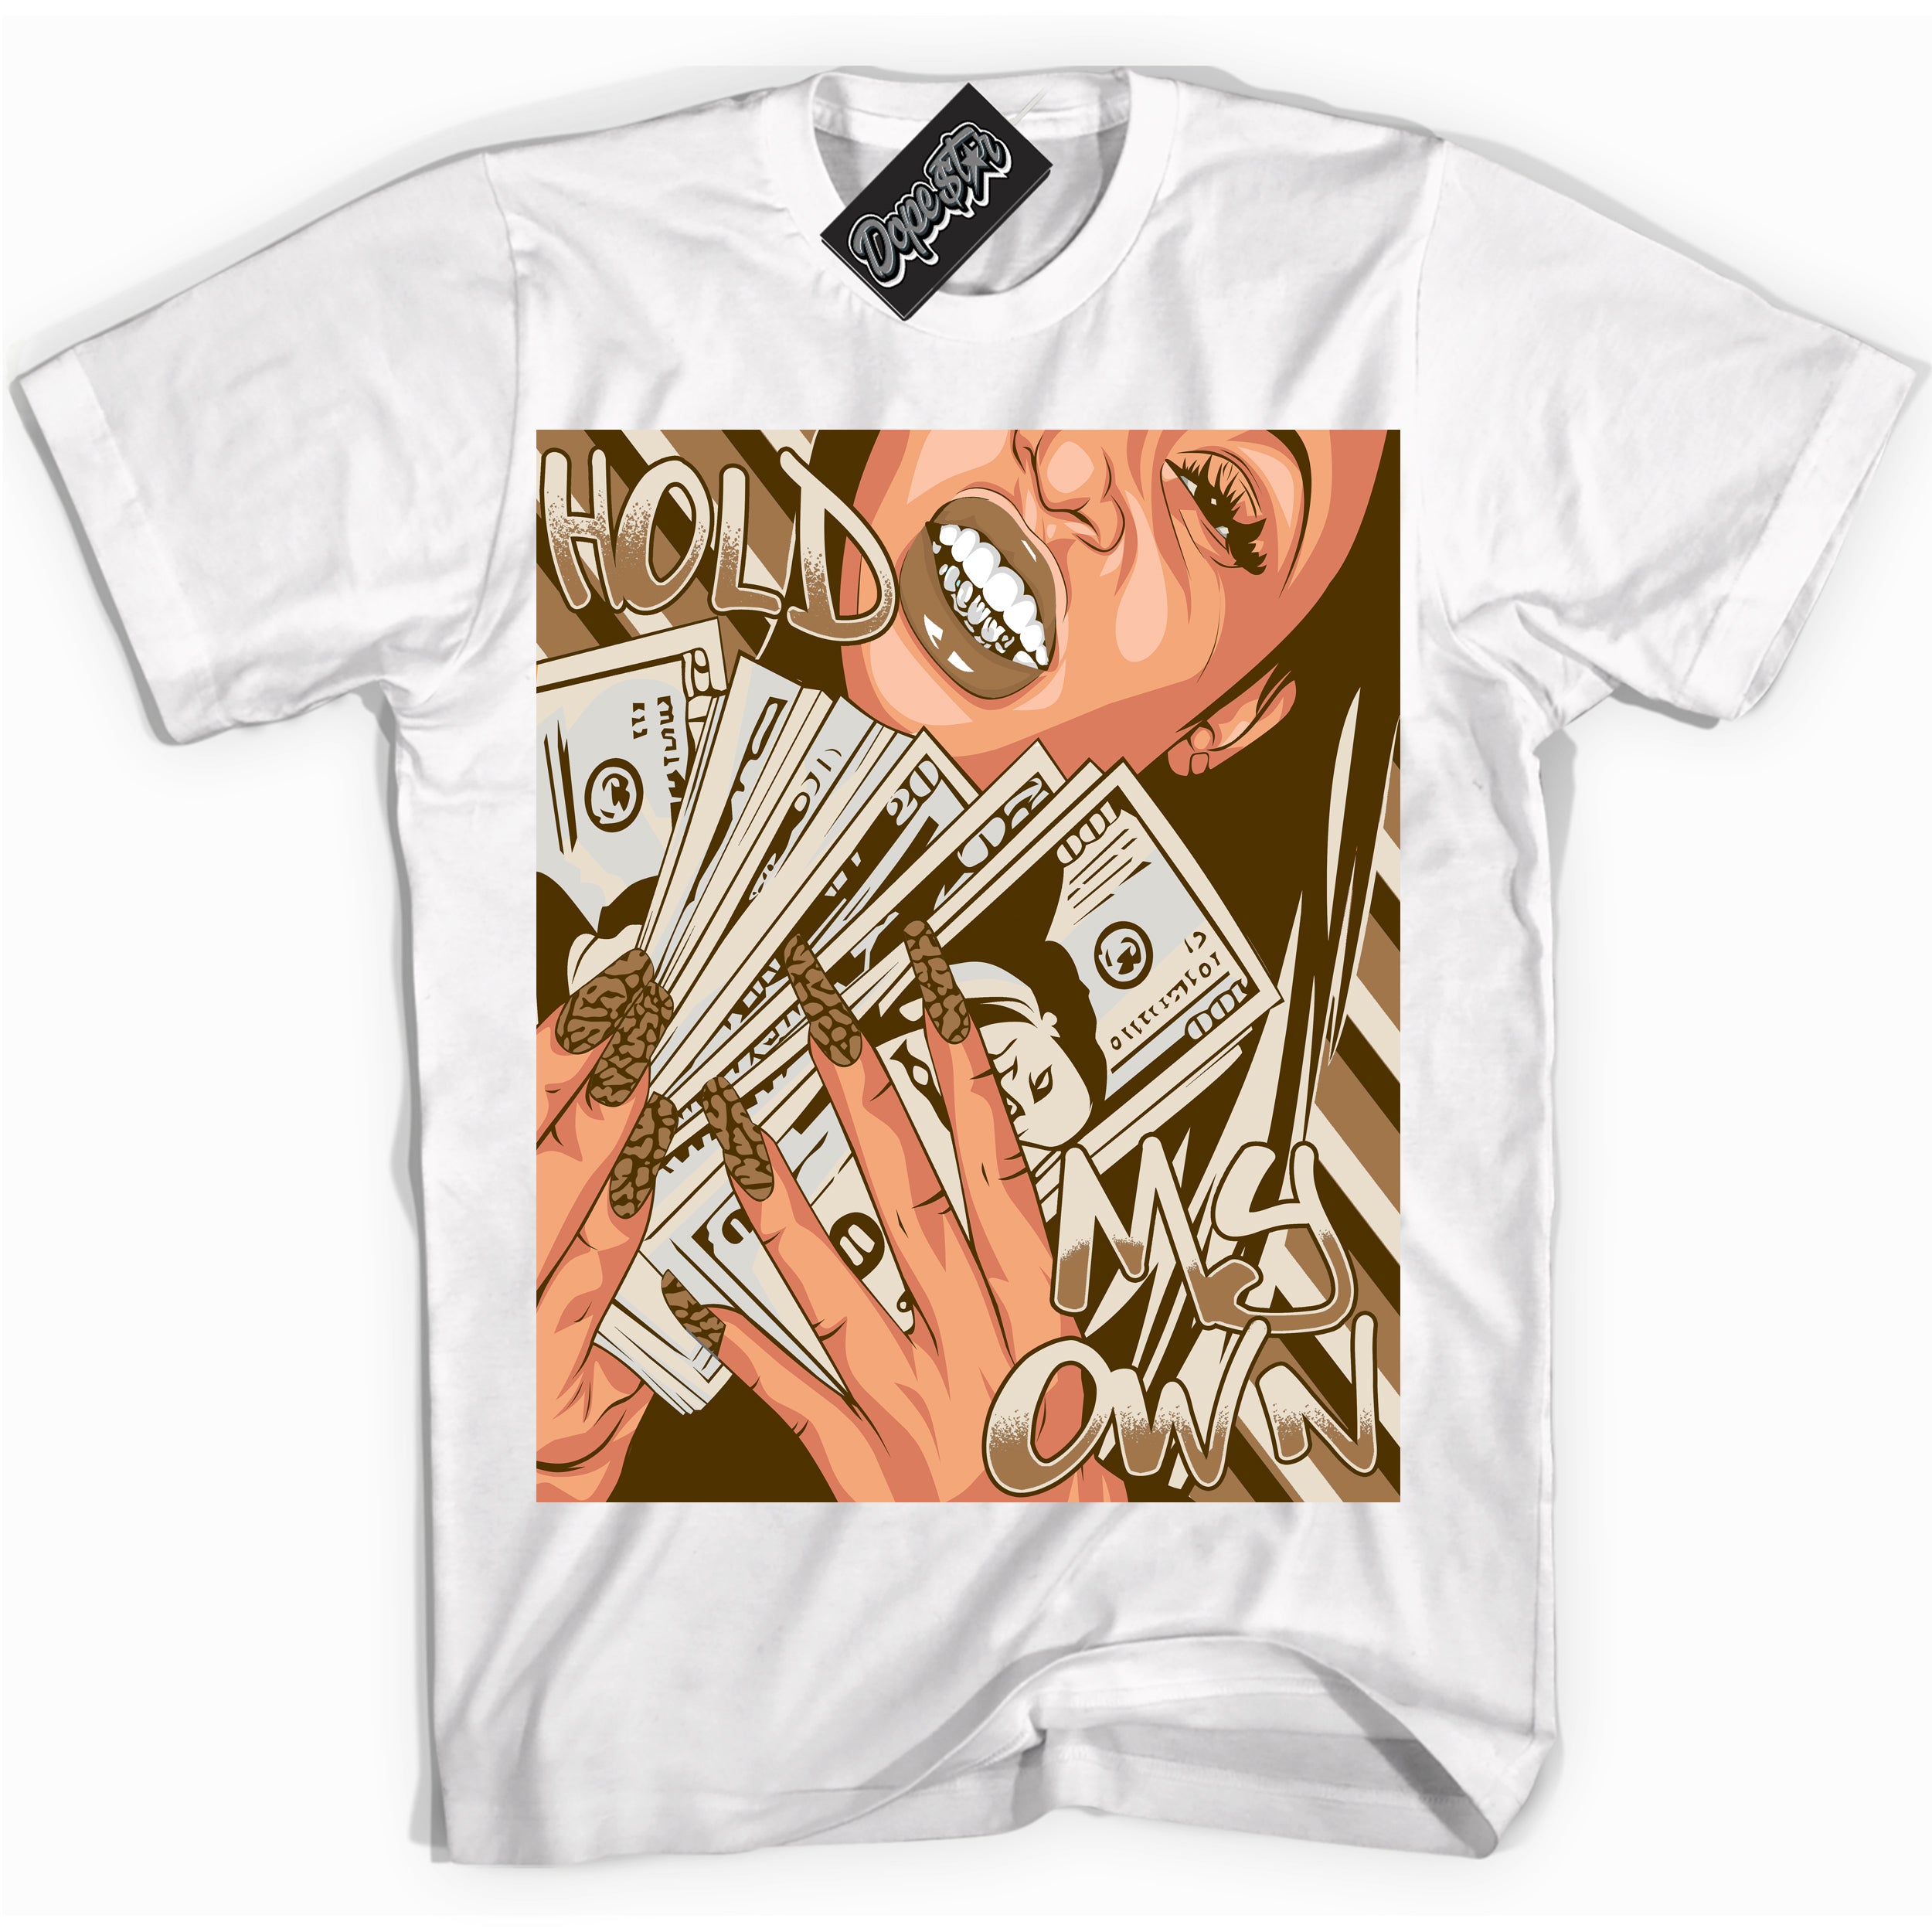 Cool White graphic tee with “ Hold My Own ” design, that perfectly matches Palomino 3s sneakers 